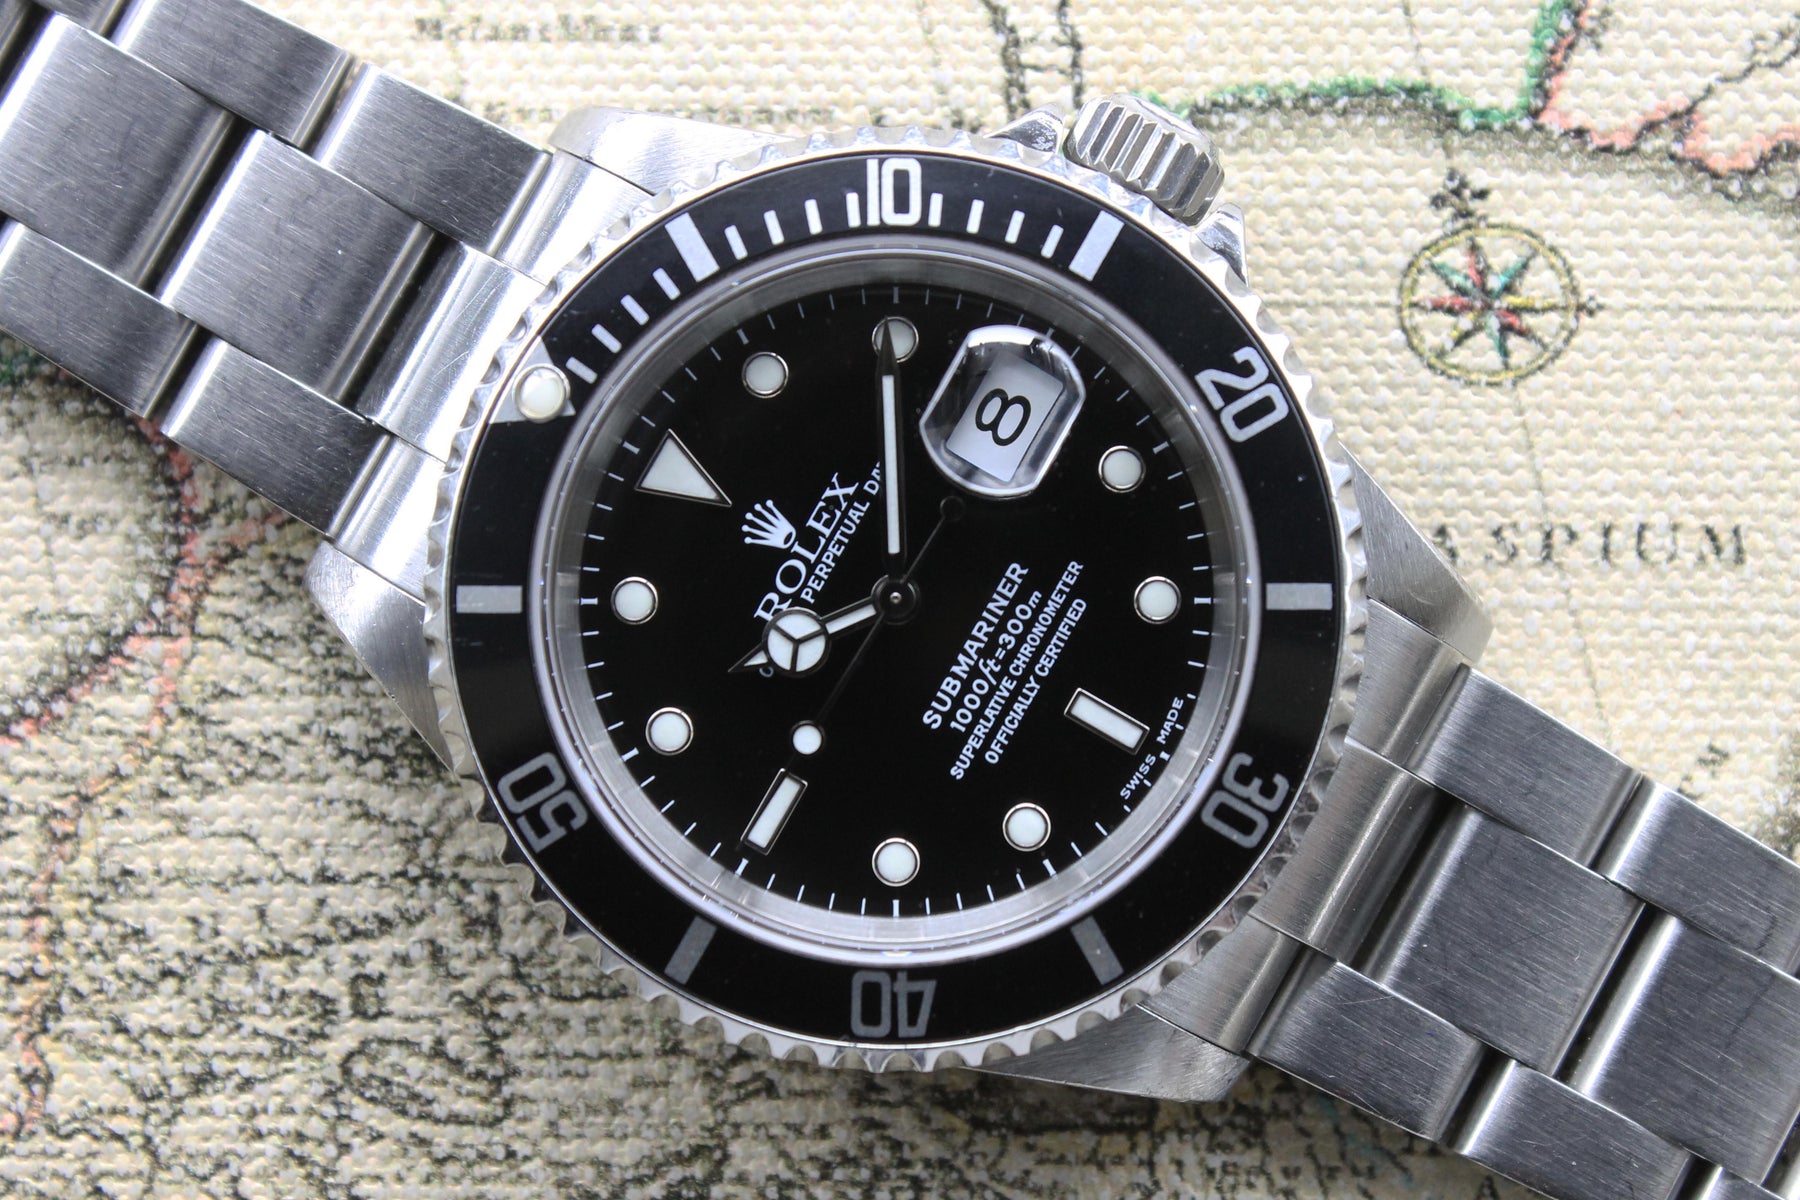 2001 Rolex Submariner Ref. 16610 (with Box & Papers)